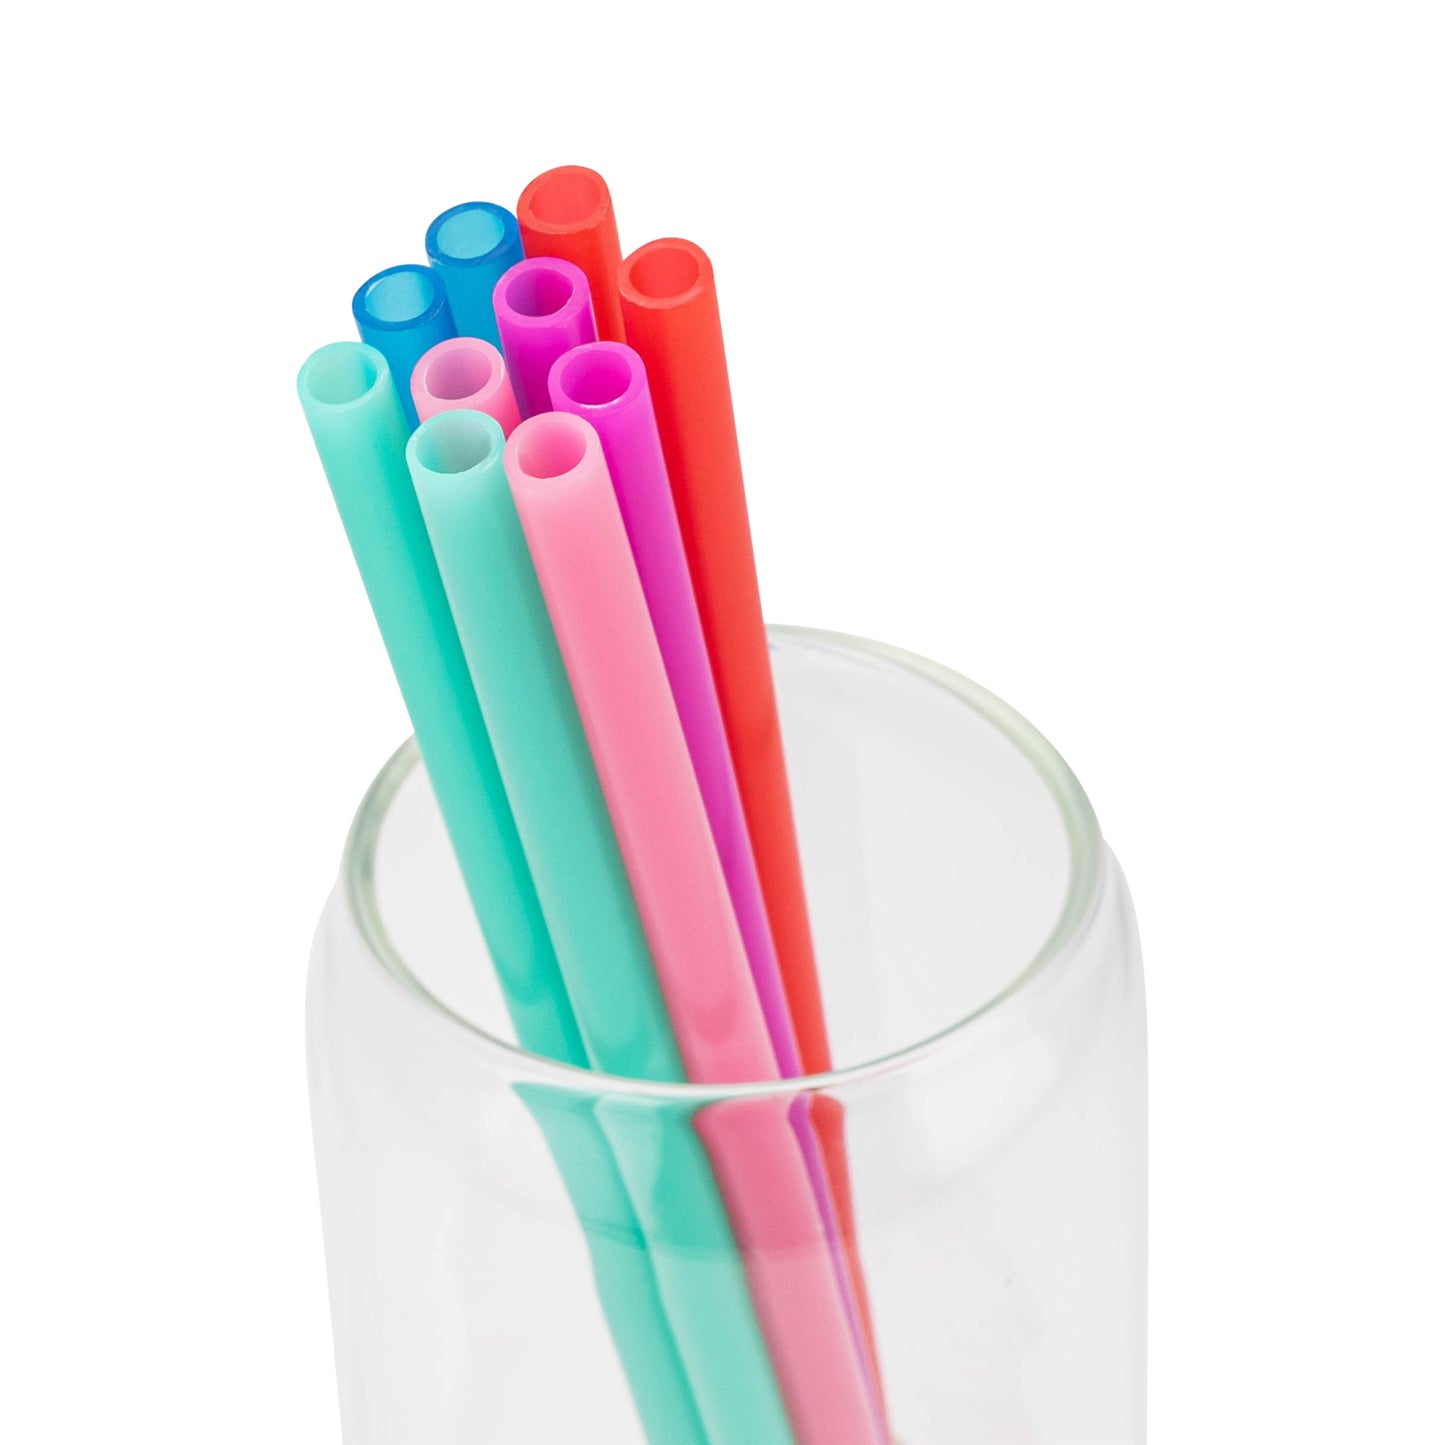 Cool Gear 10-Pack Reusable Drinking Straws | Eco-Friendly, Dishwasher Safe, Hard Plastic, Replacement Straws For Tumblers, Mason Jars, & Travel | Sturdy and Easy to Clean